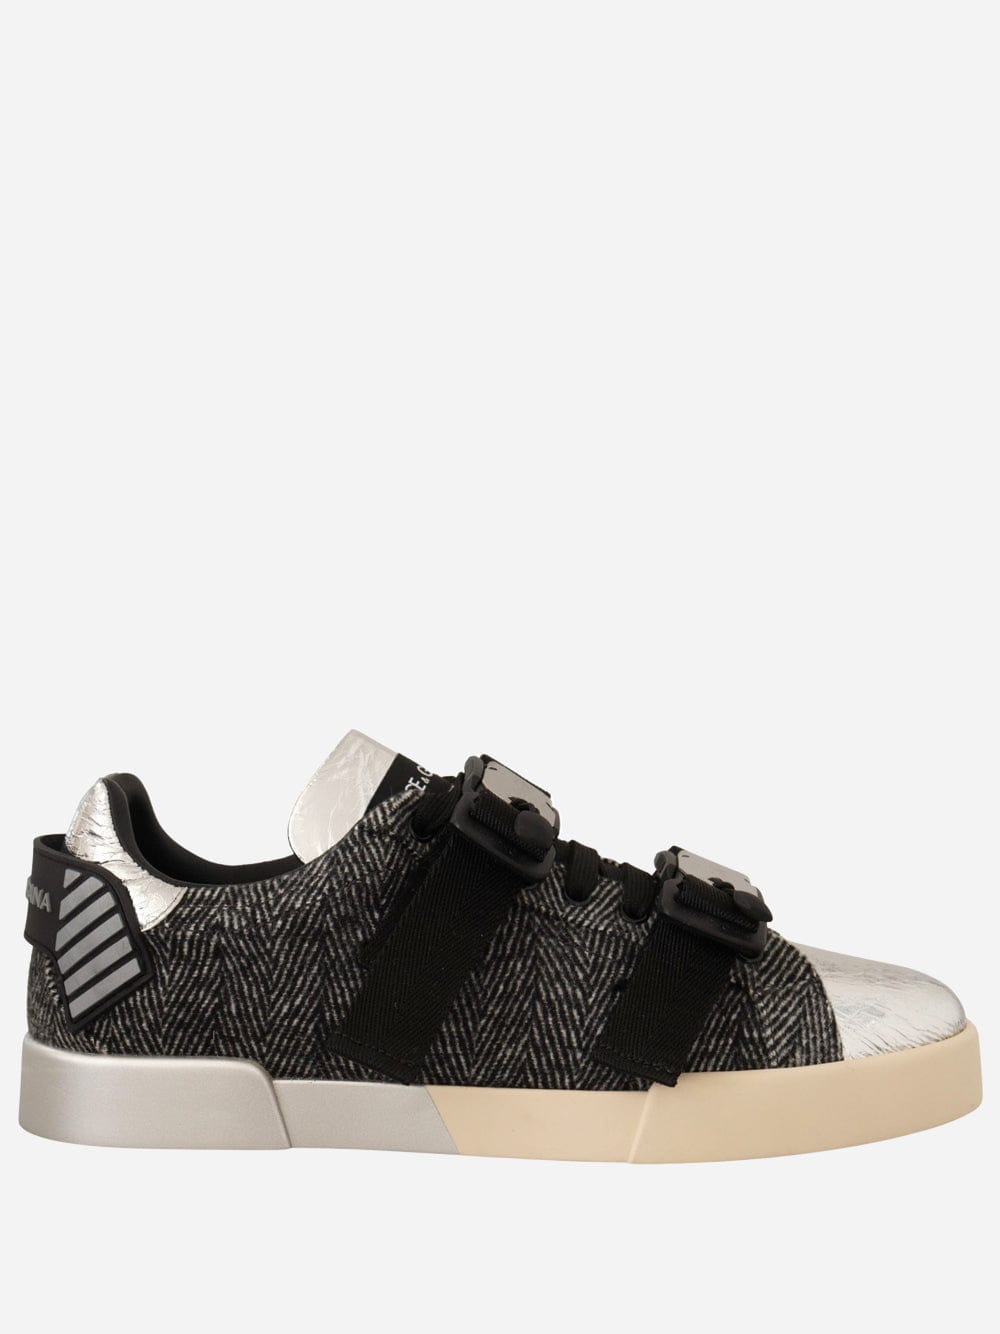 Dolce & Gabbana Logo Strapped Sneakers